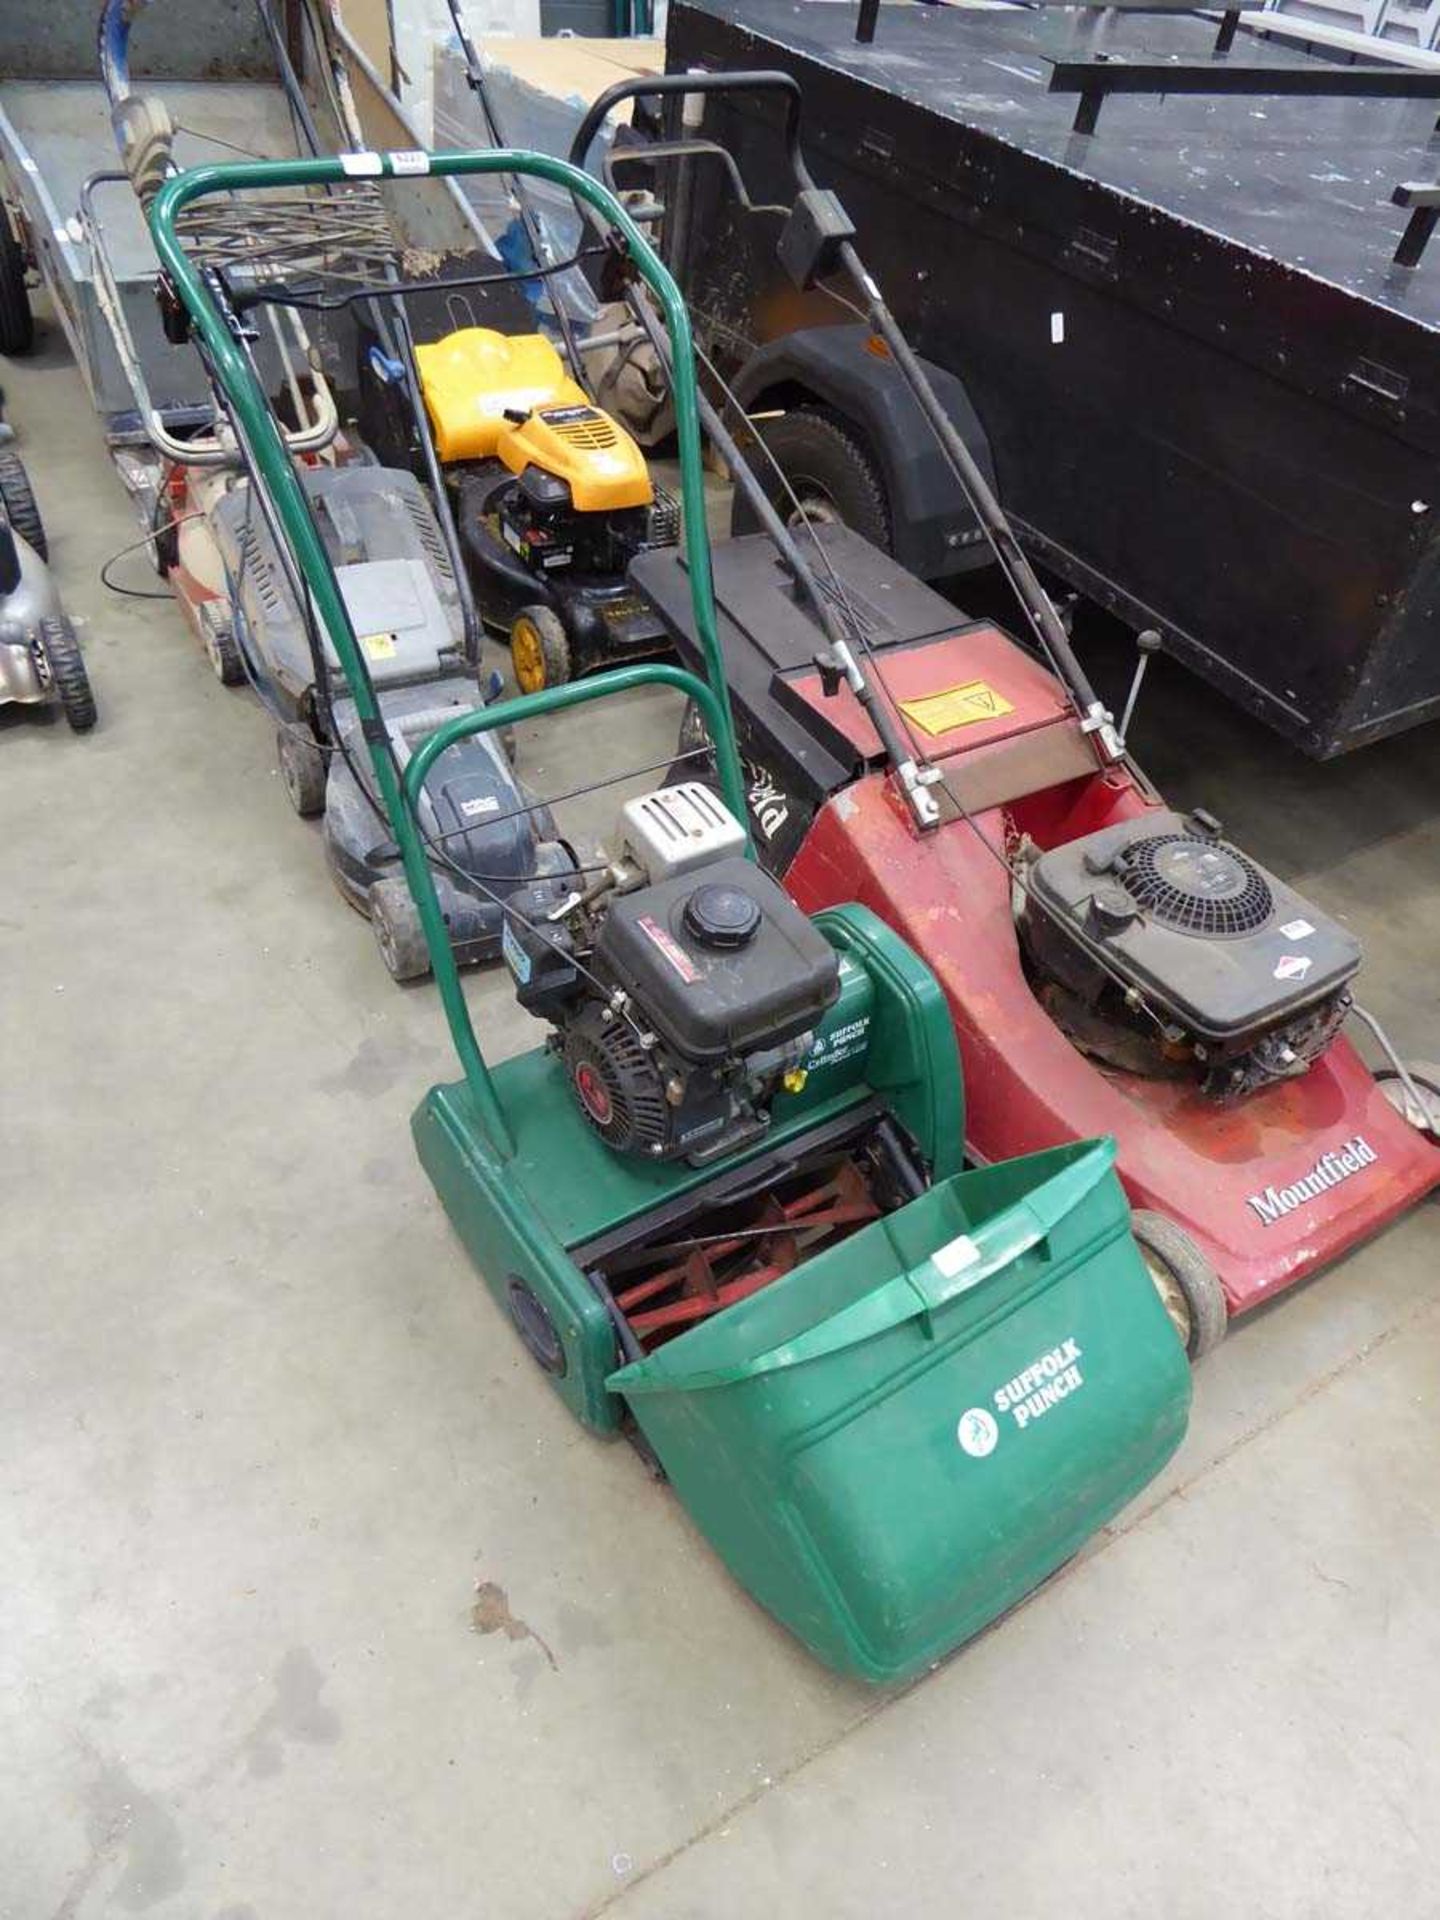 Suffolk Punch petrol powered cylinder mower with grass box